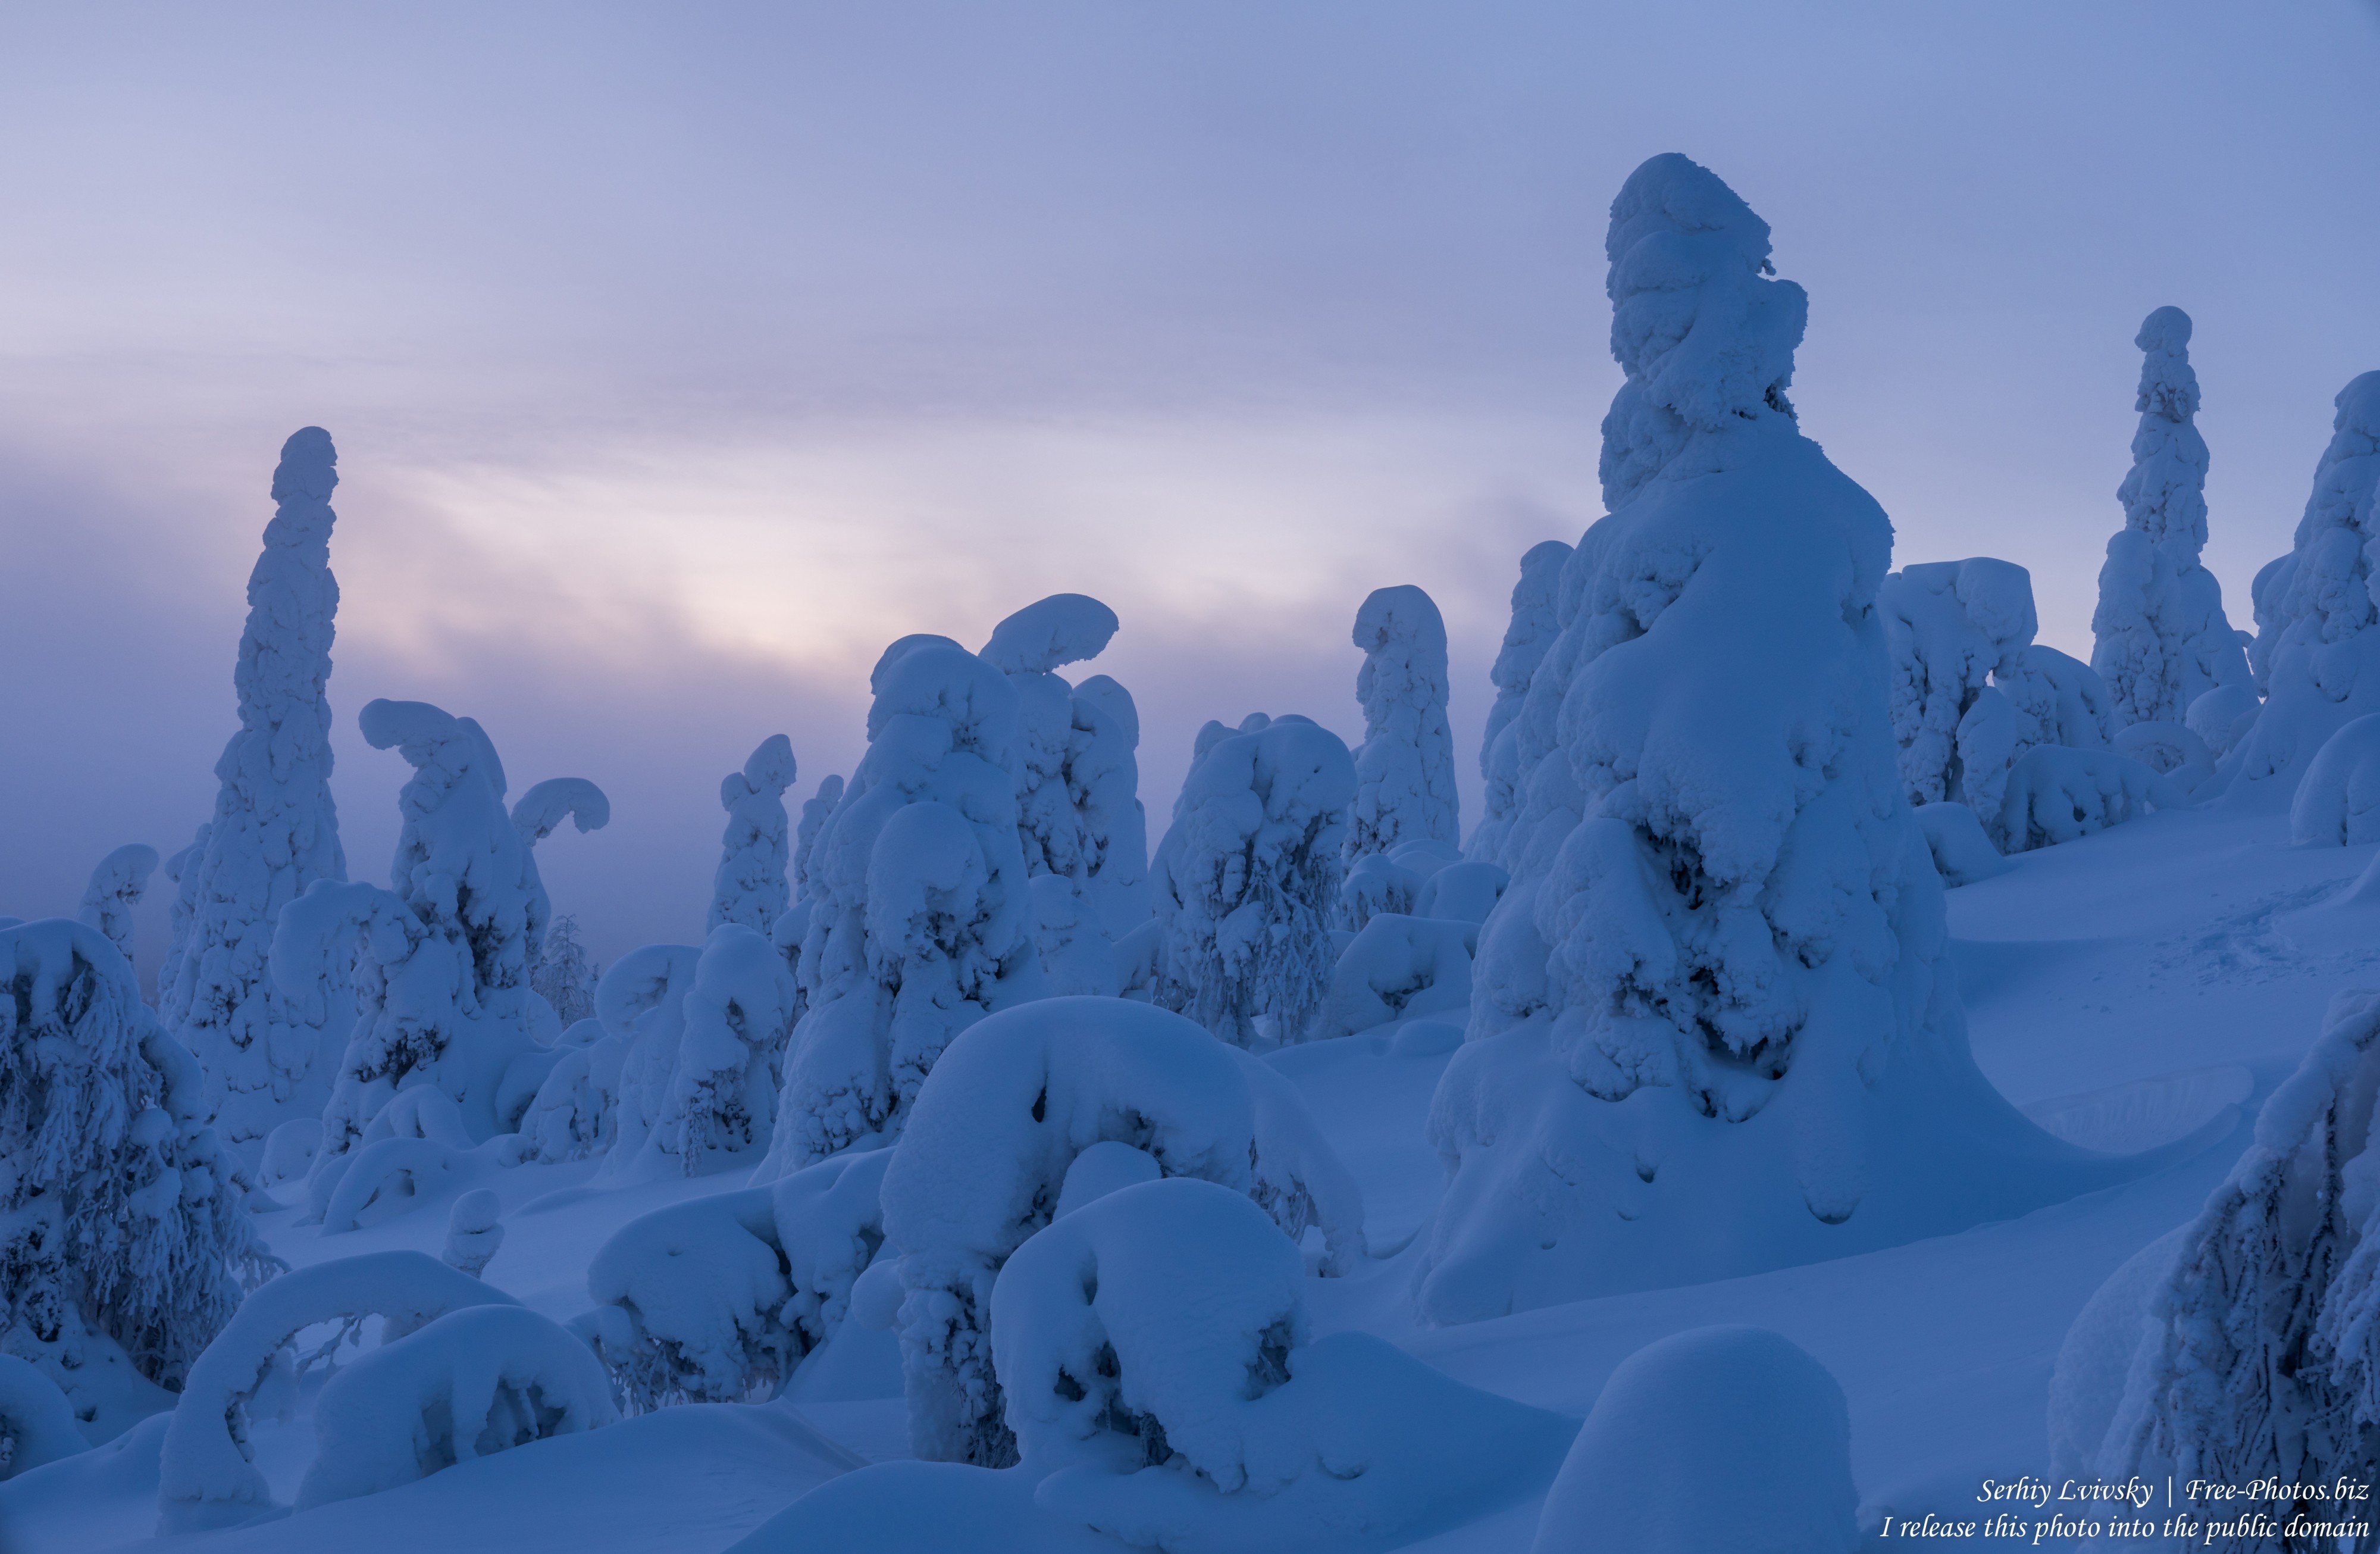 Valtavaara, Finland, photographed in January 2020 by Serhiy Lvivsky, picture 51